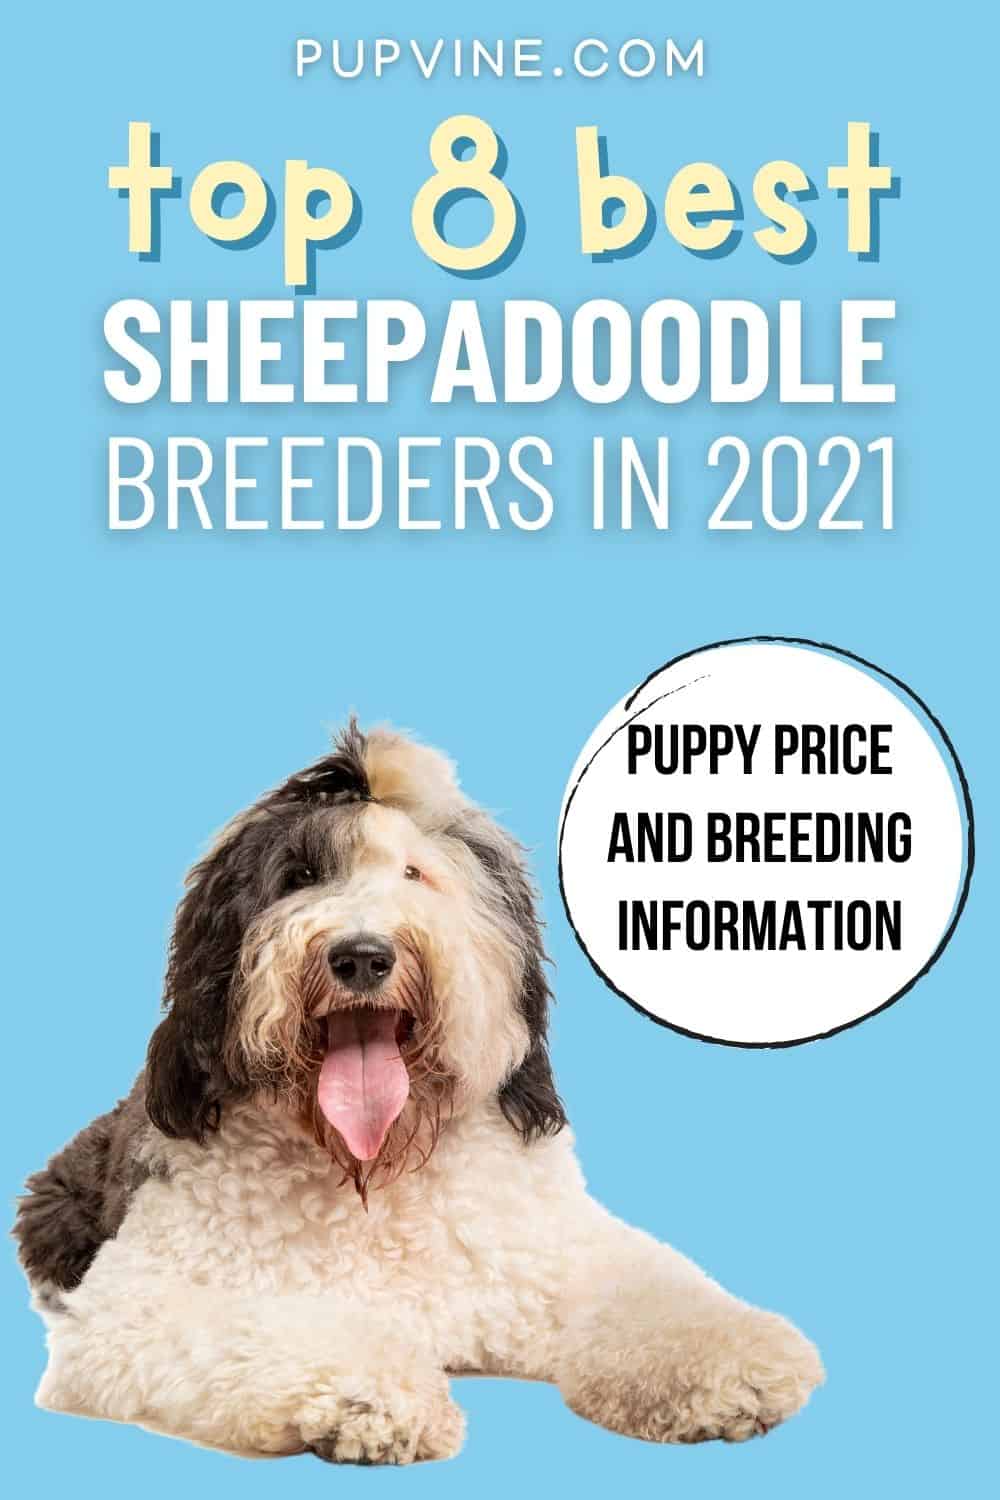 Top 8 Best Sheepadoodle Breeders In 2021 – Puppy Price And Breeding Information